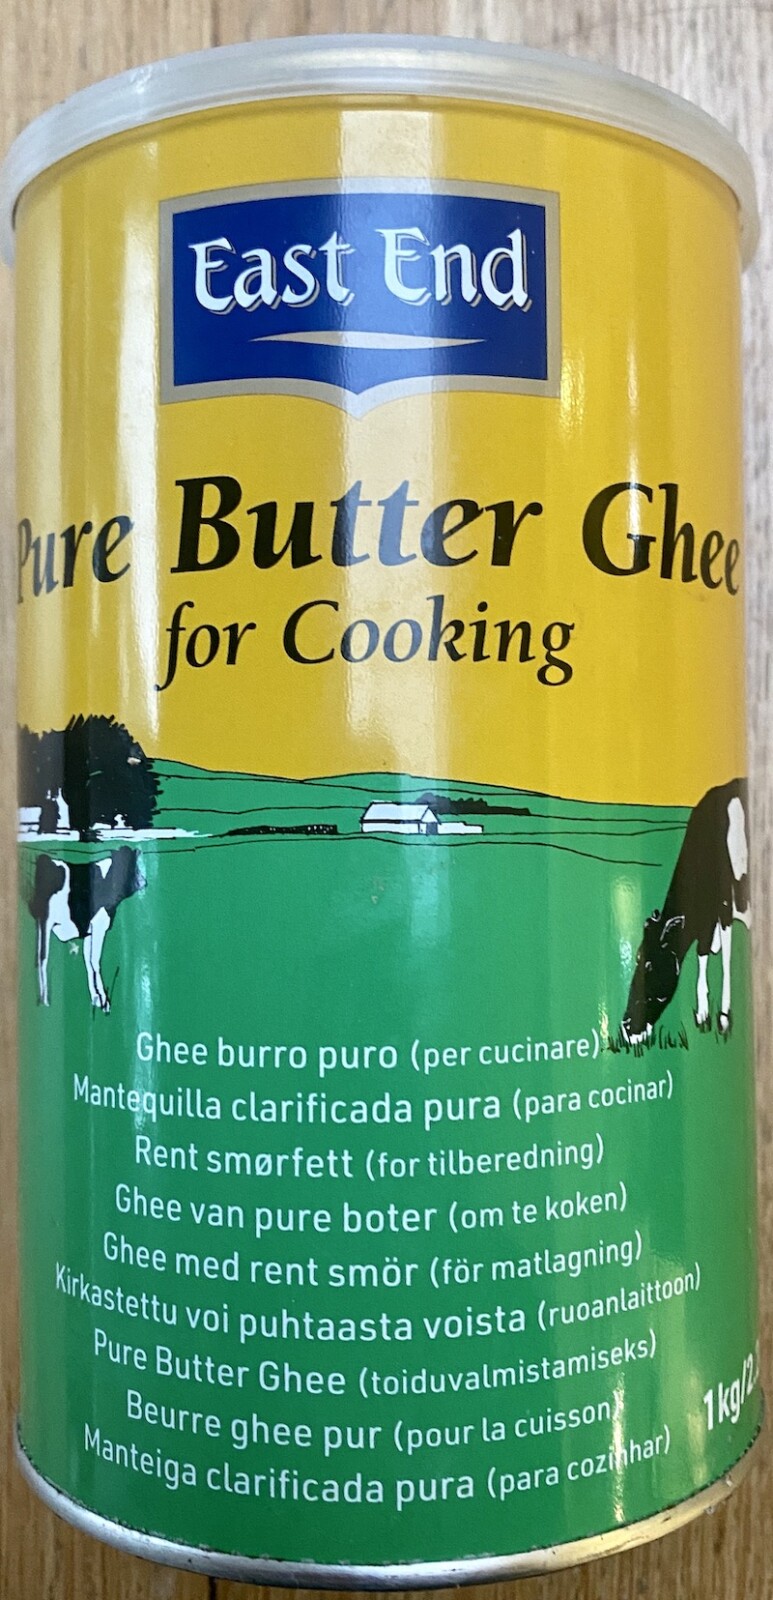 a tin of East End brand pure butter ghee.